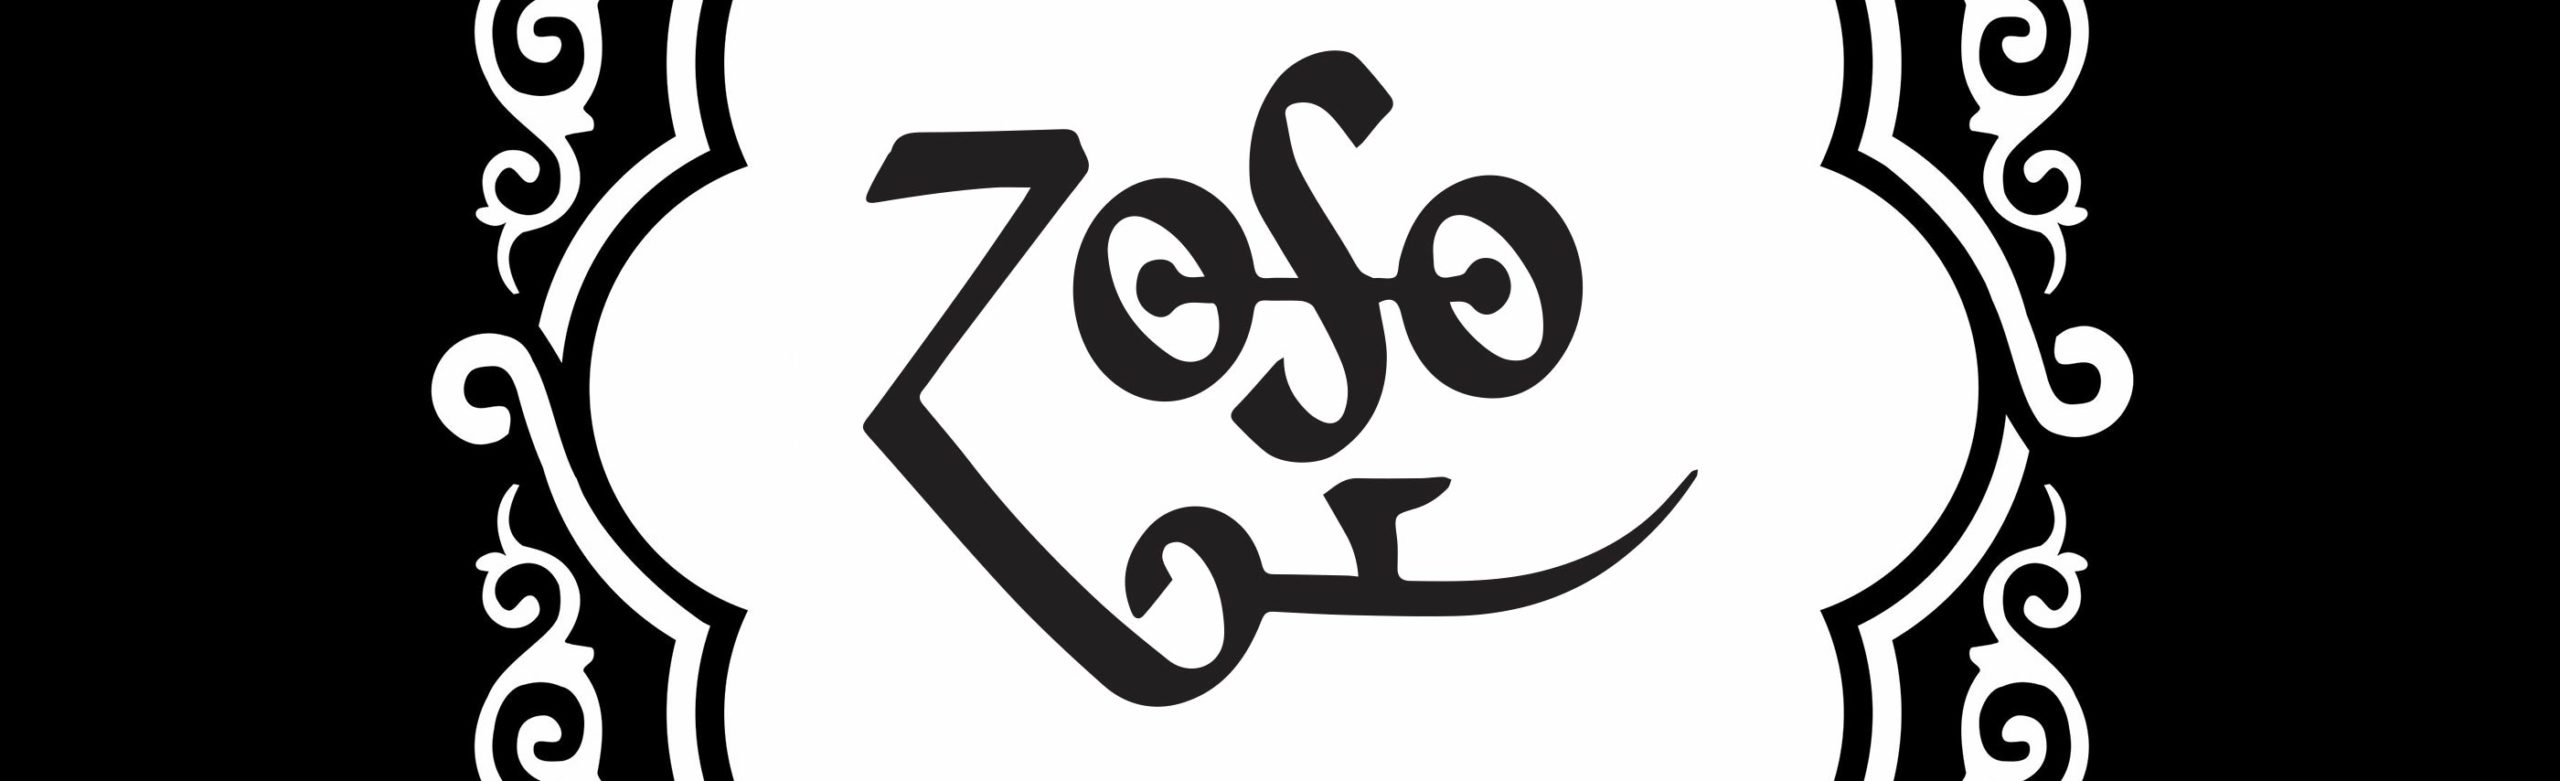 Event Info: Zoso – A Tribute to Led Zeppelin at the Wilma 2020 Image